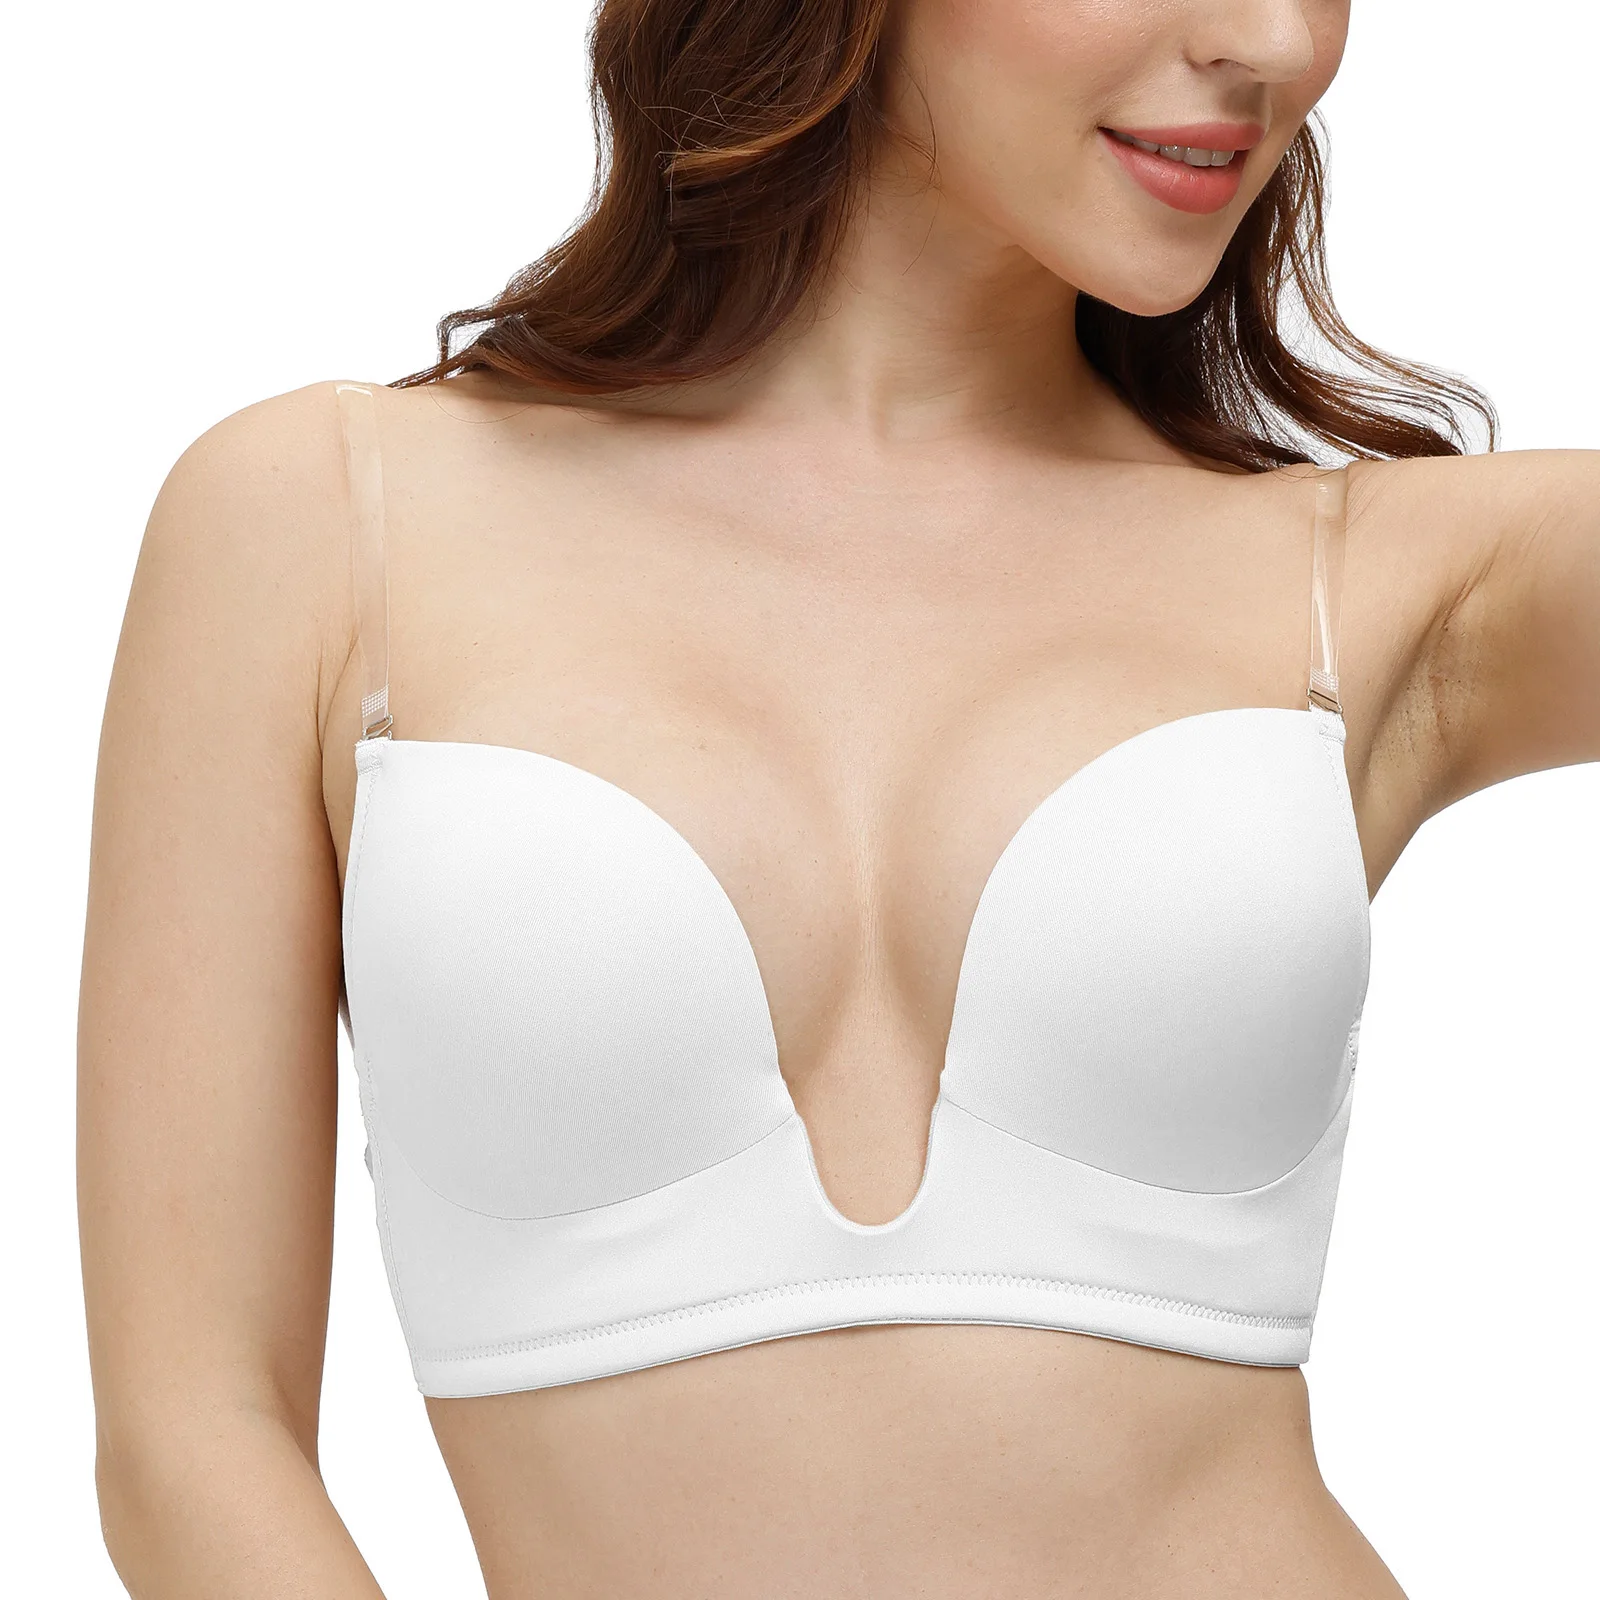 Vgplay Add 2 Cup Push Up Bras For Women Thick Padded Women Bra